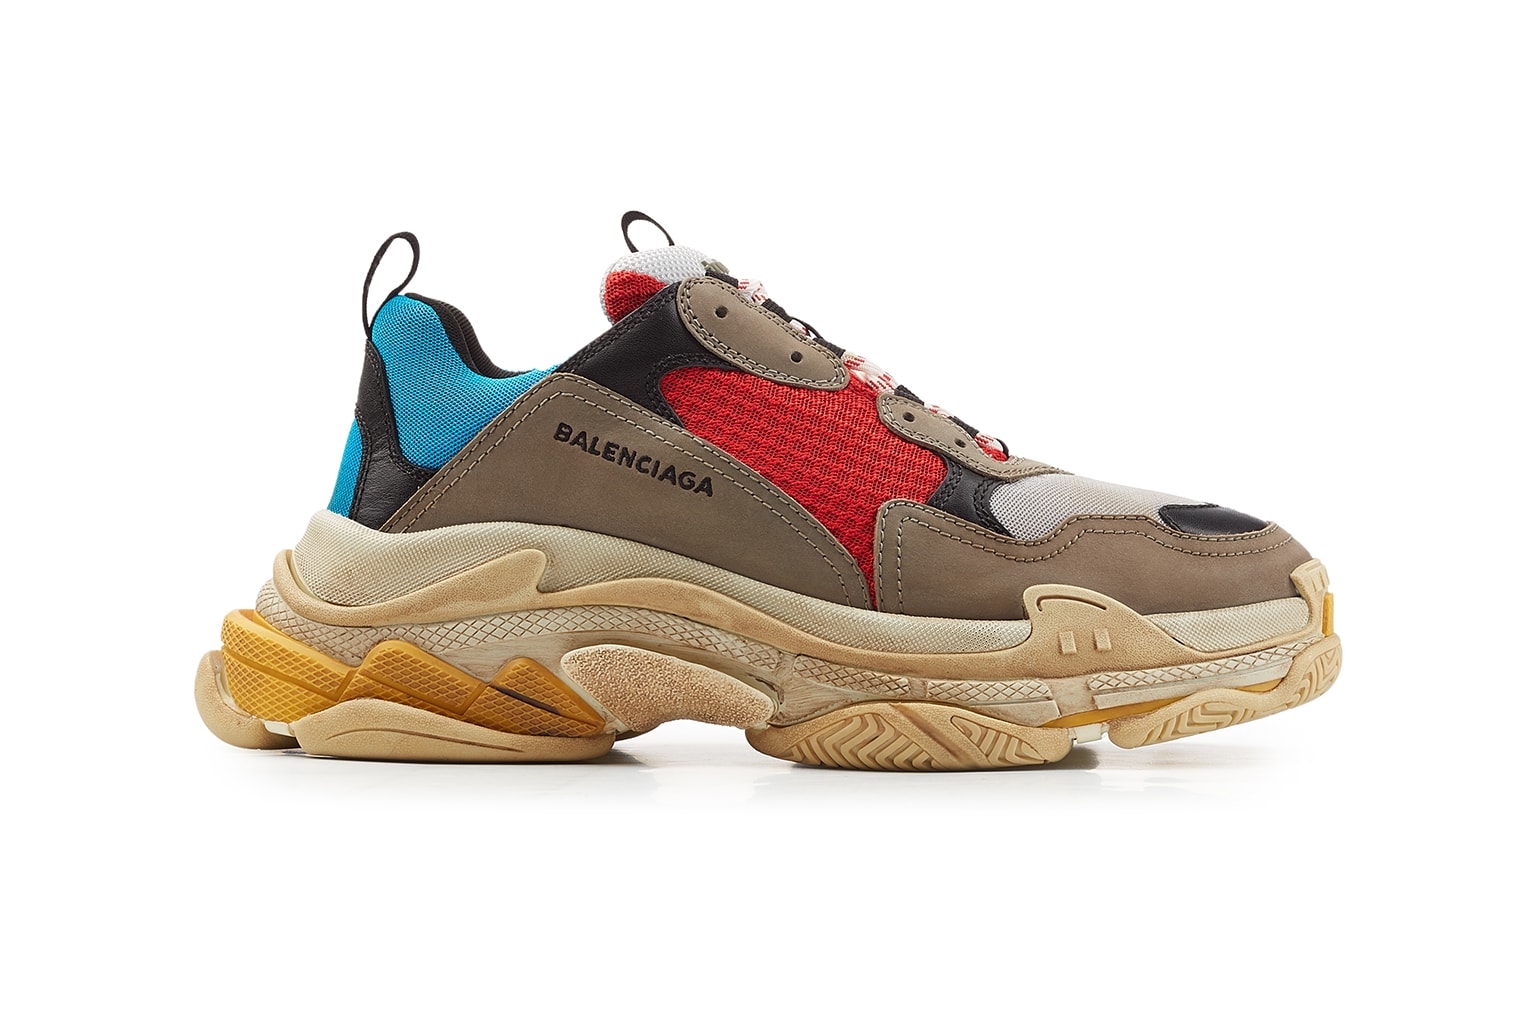 New Balenciaga Triple S Colorways Are Dropping | Hypebeast